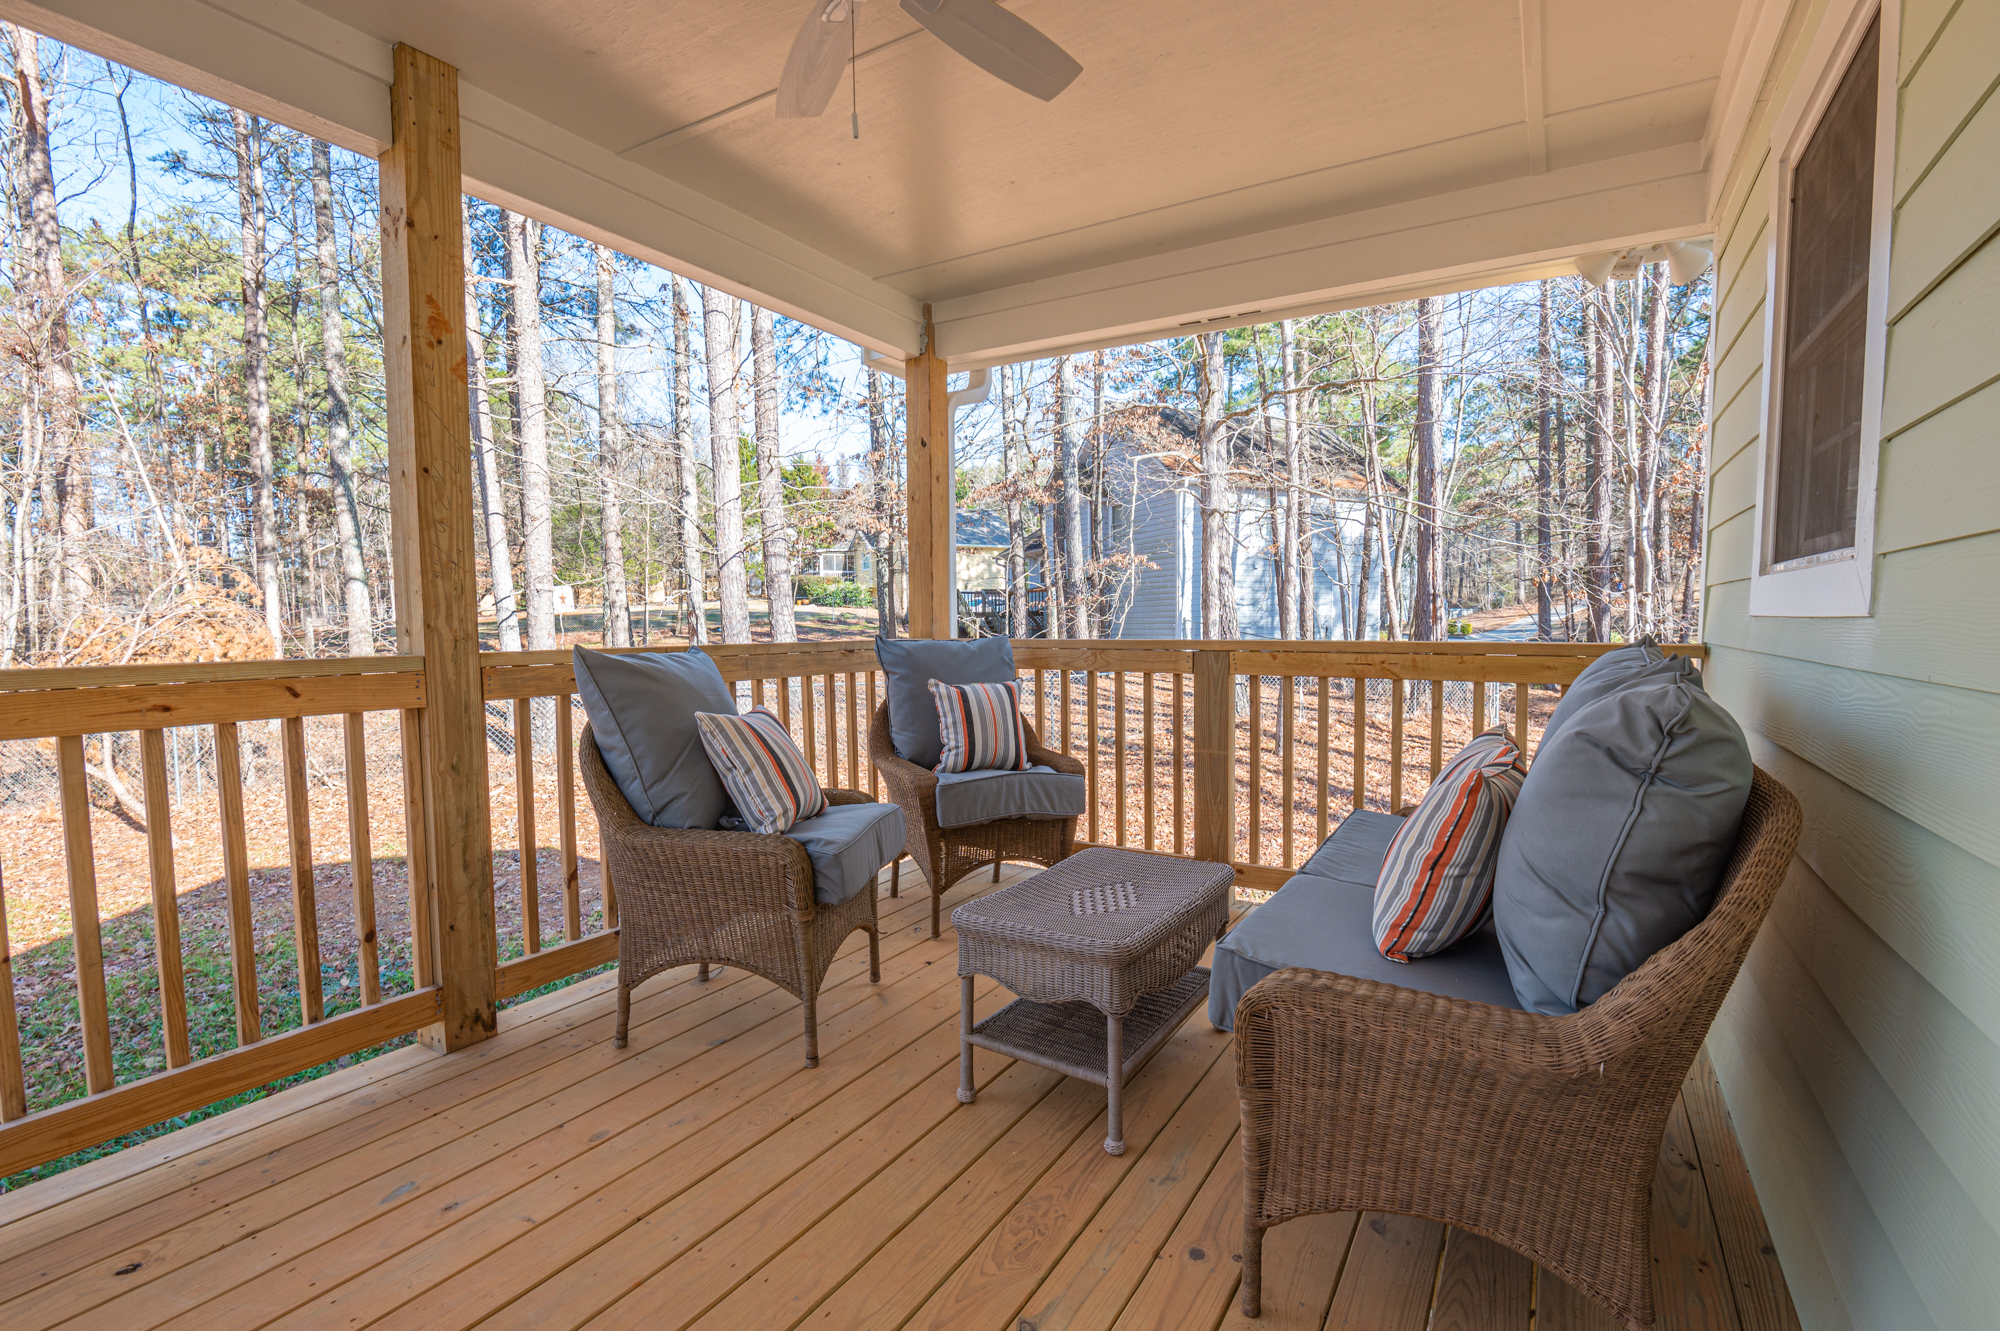 Cabin Style & Comfy Back Deck Near LakePoint PBR